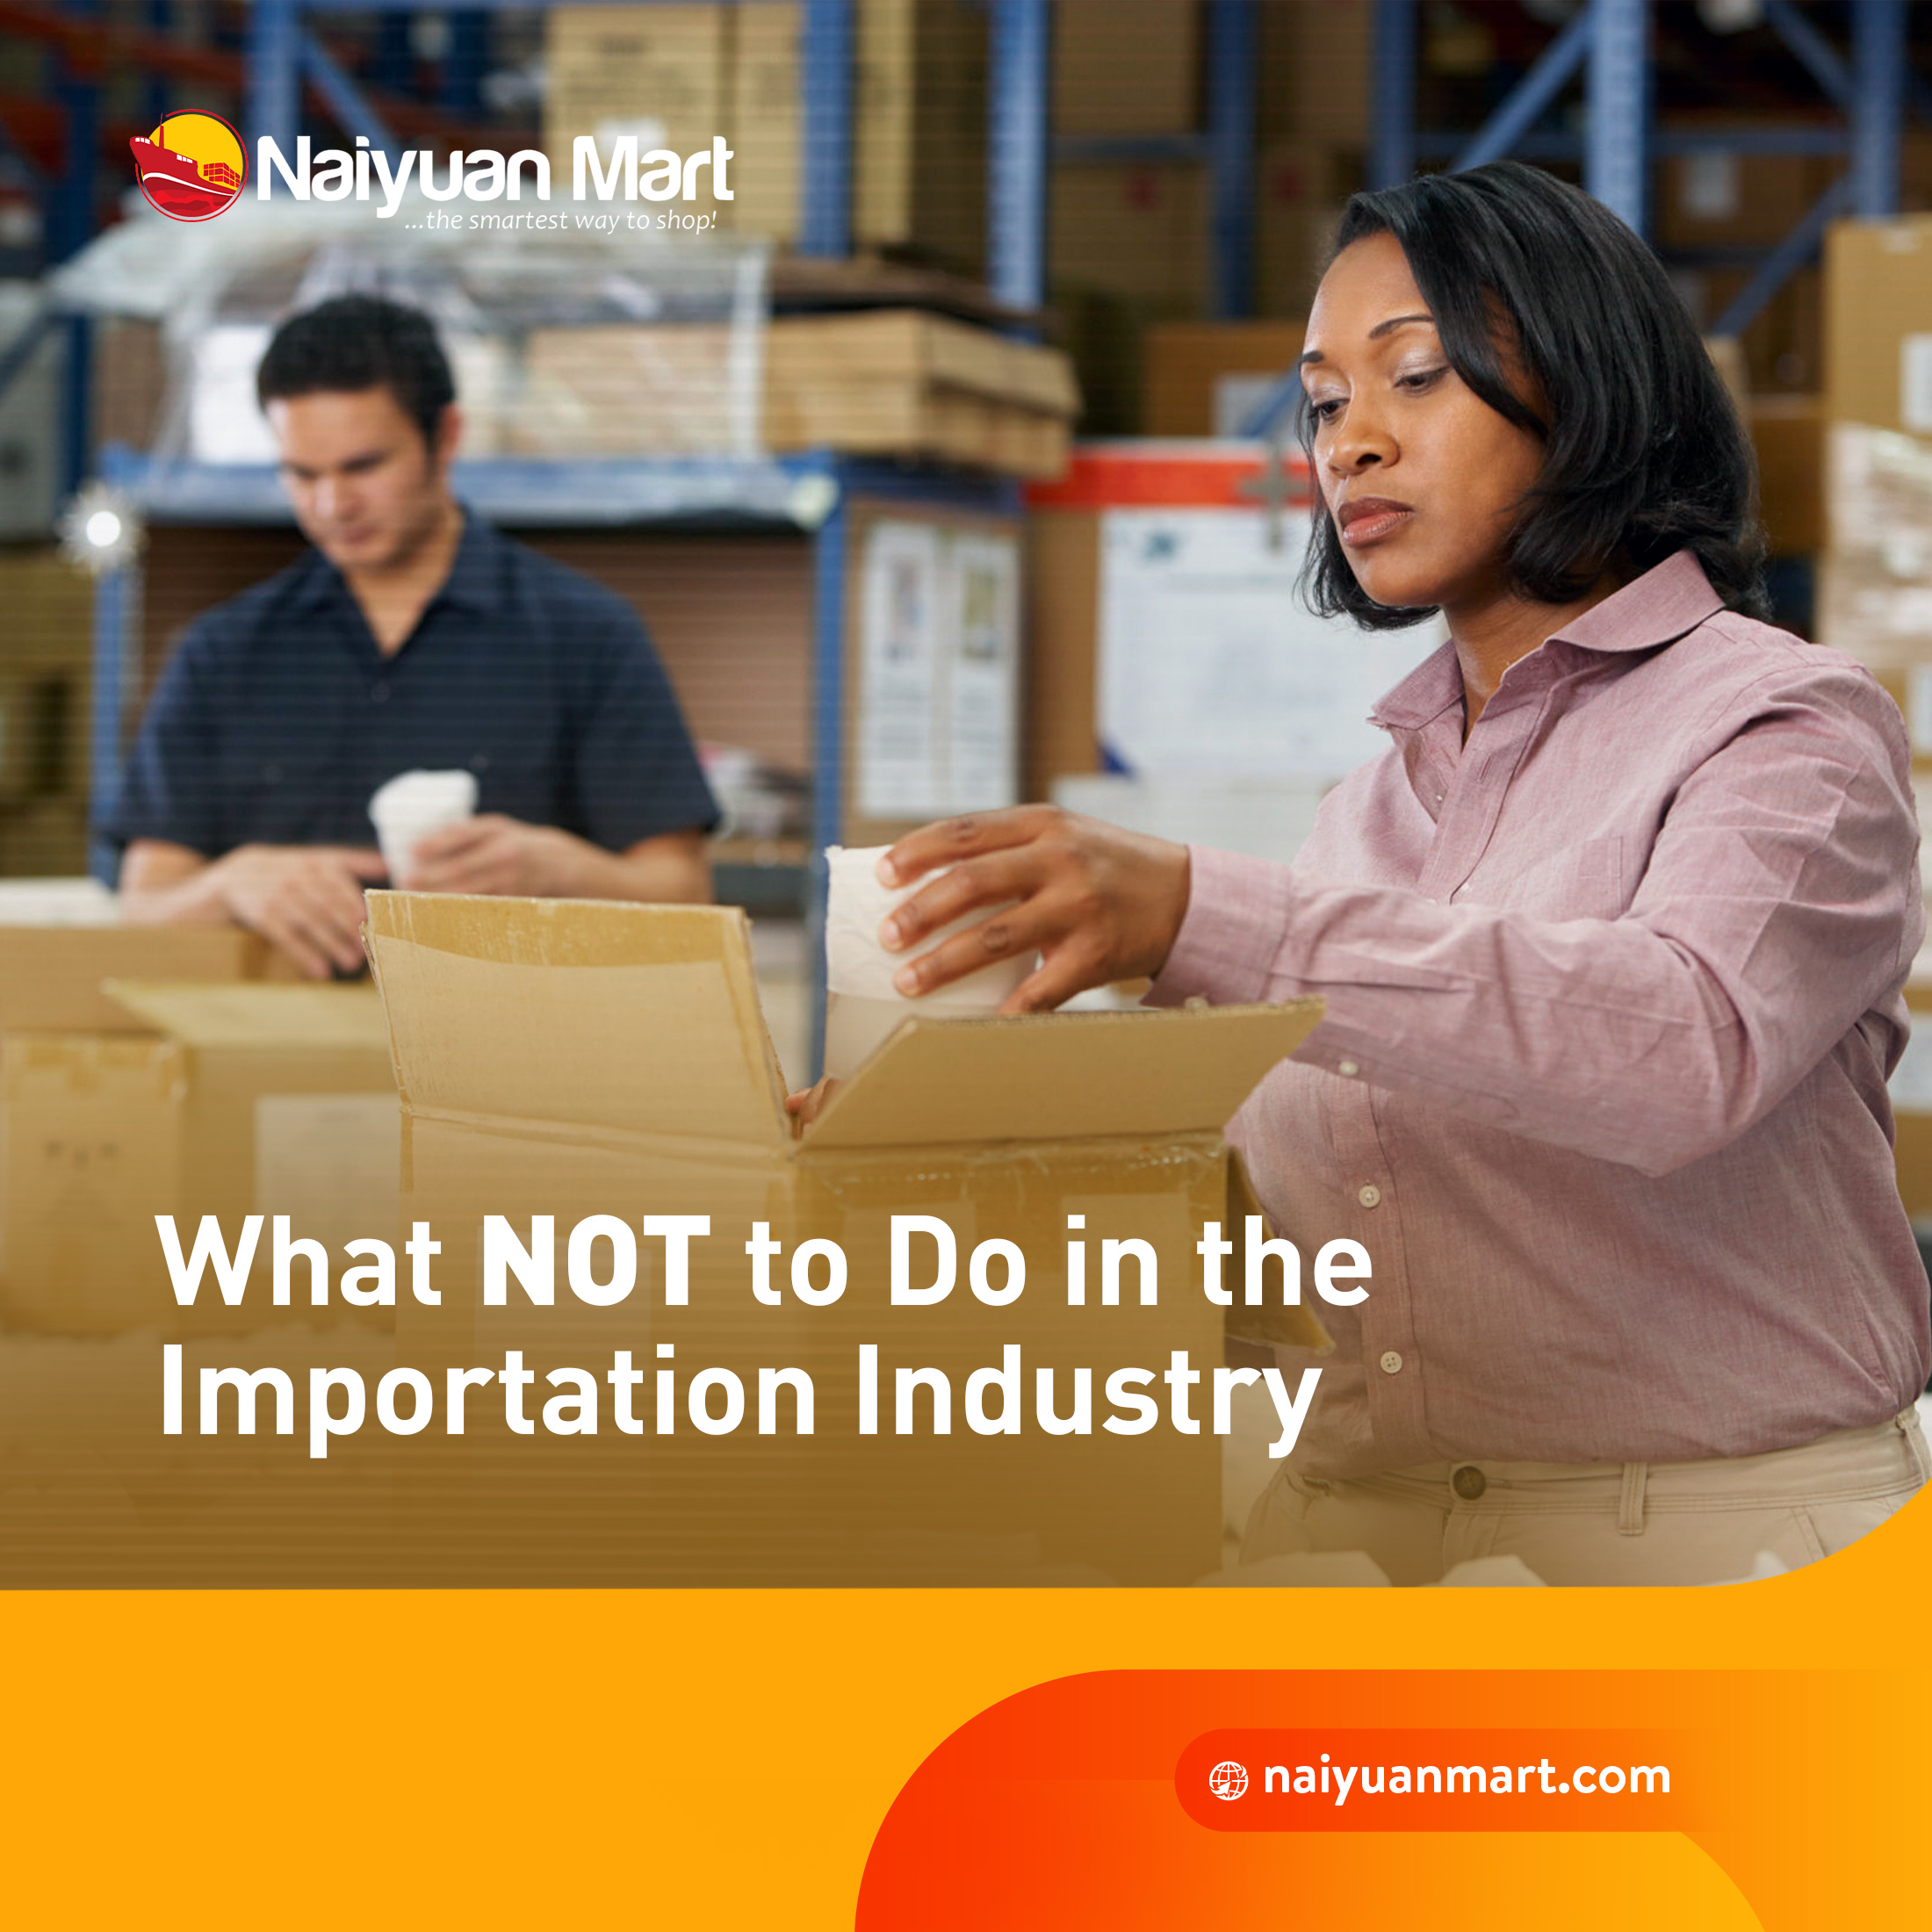 What NOT to Do in the Importation Industry